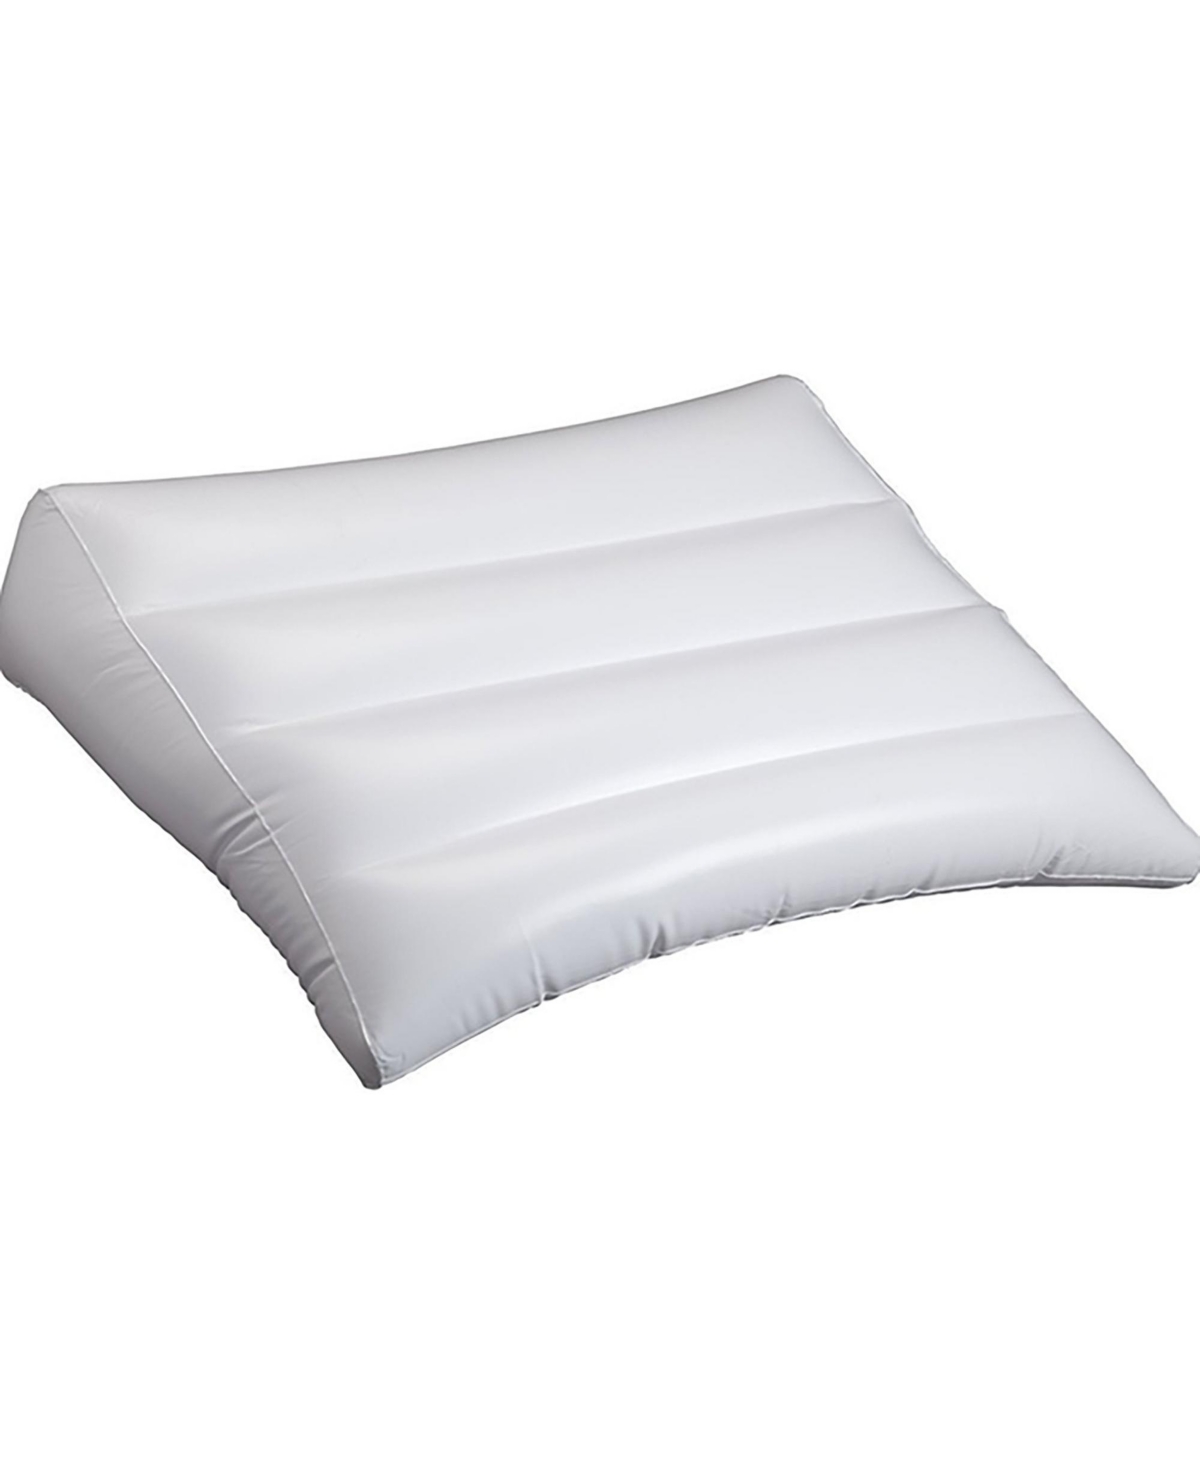 Dr Pillow Self-cooling Pillow Pad In White